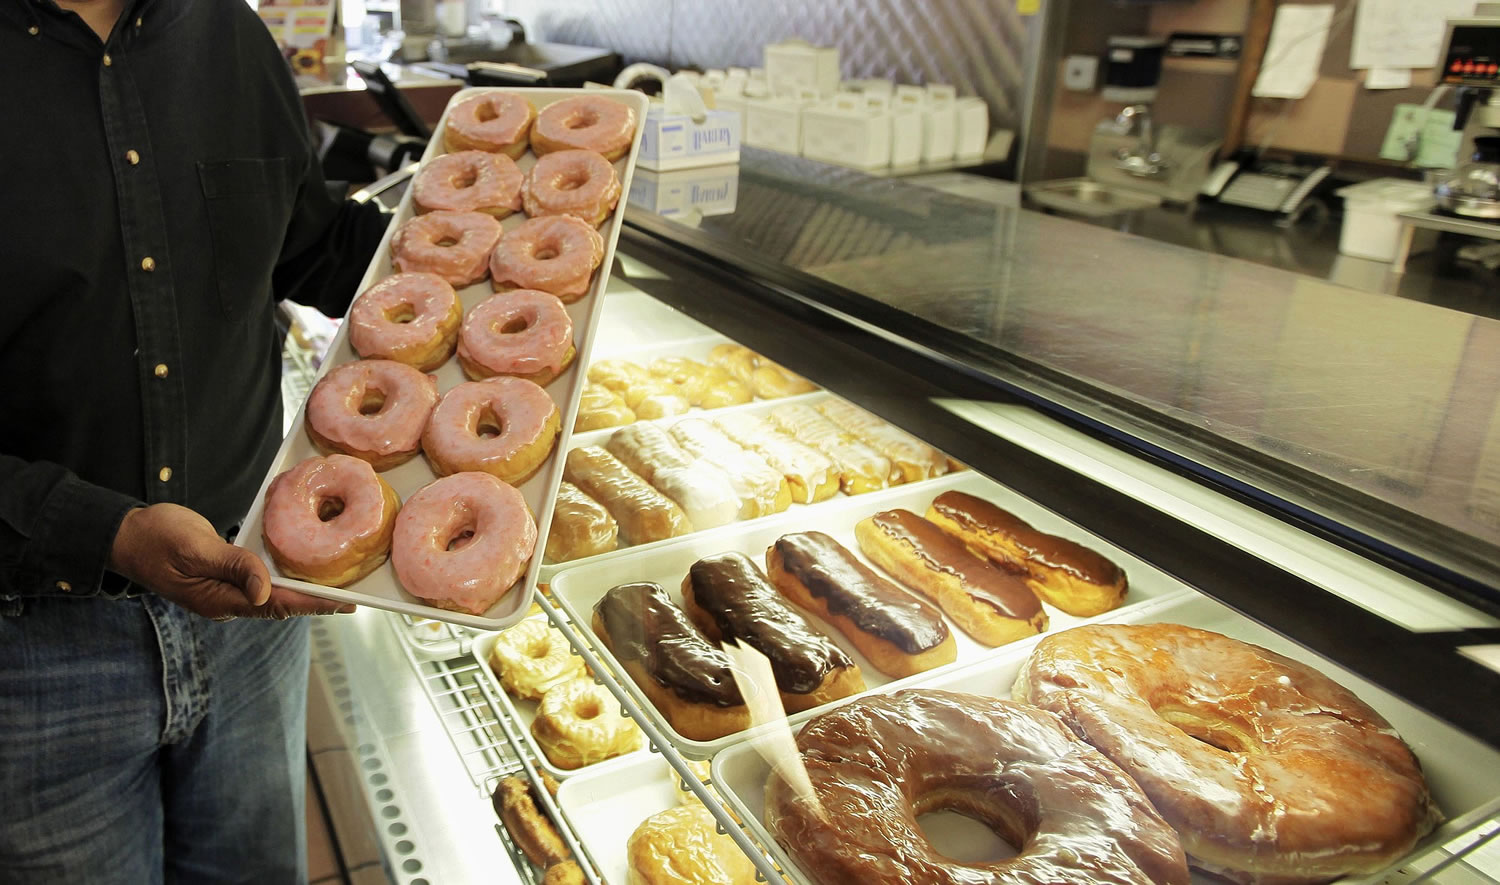 Doughnuts are displayed in Chicago.